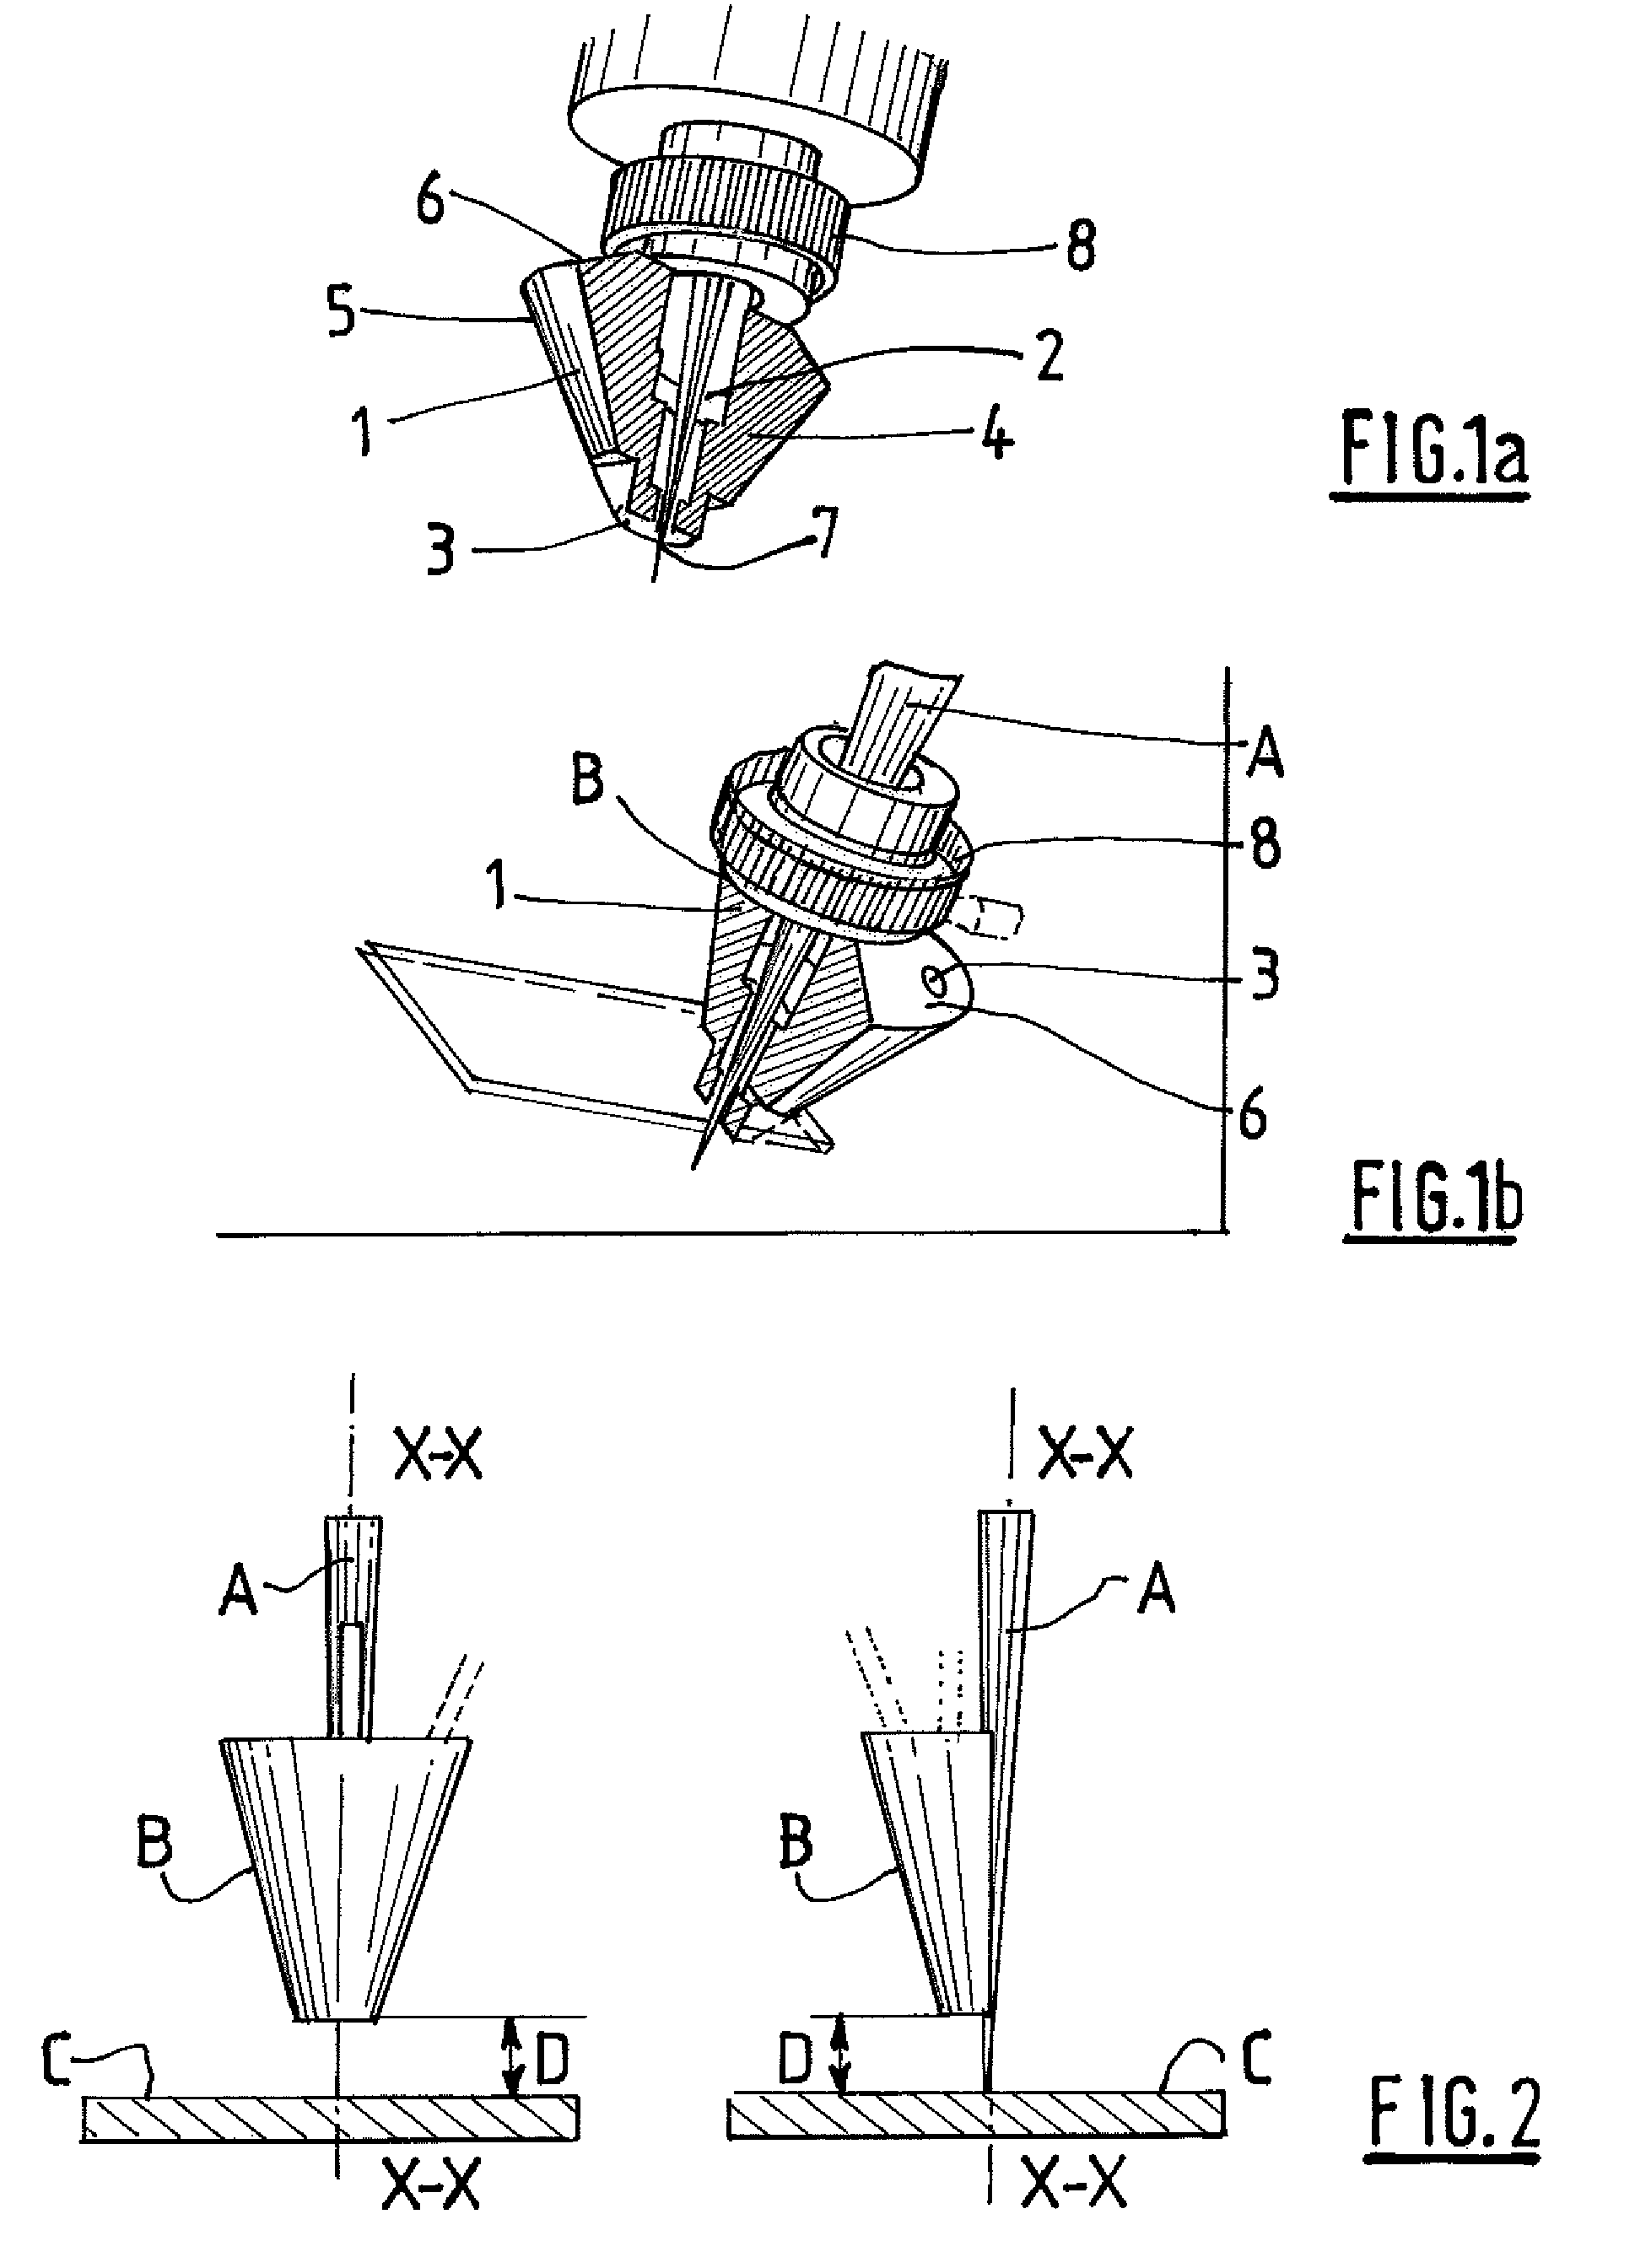 Method for laser welding using a nozzle capable of stabilizing the keyhole